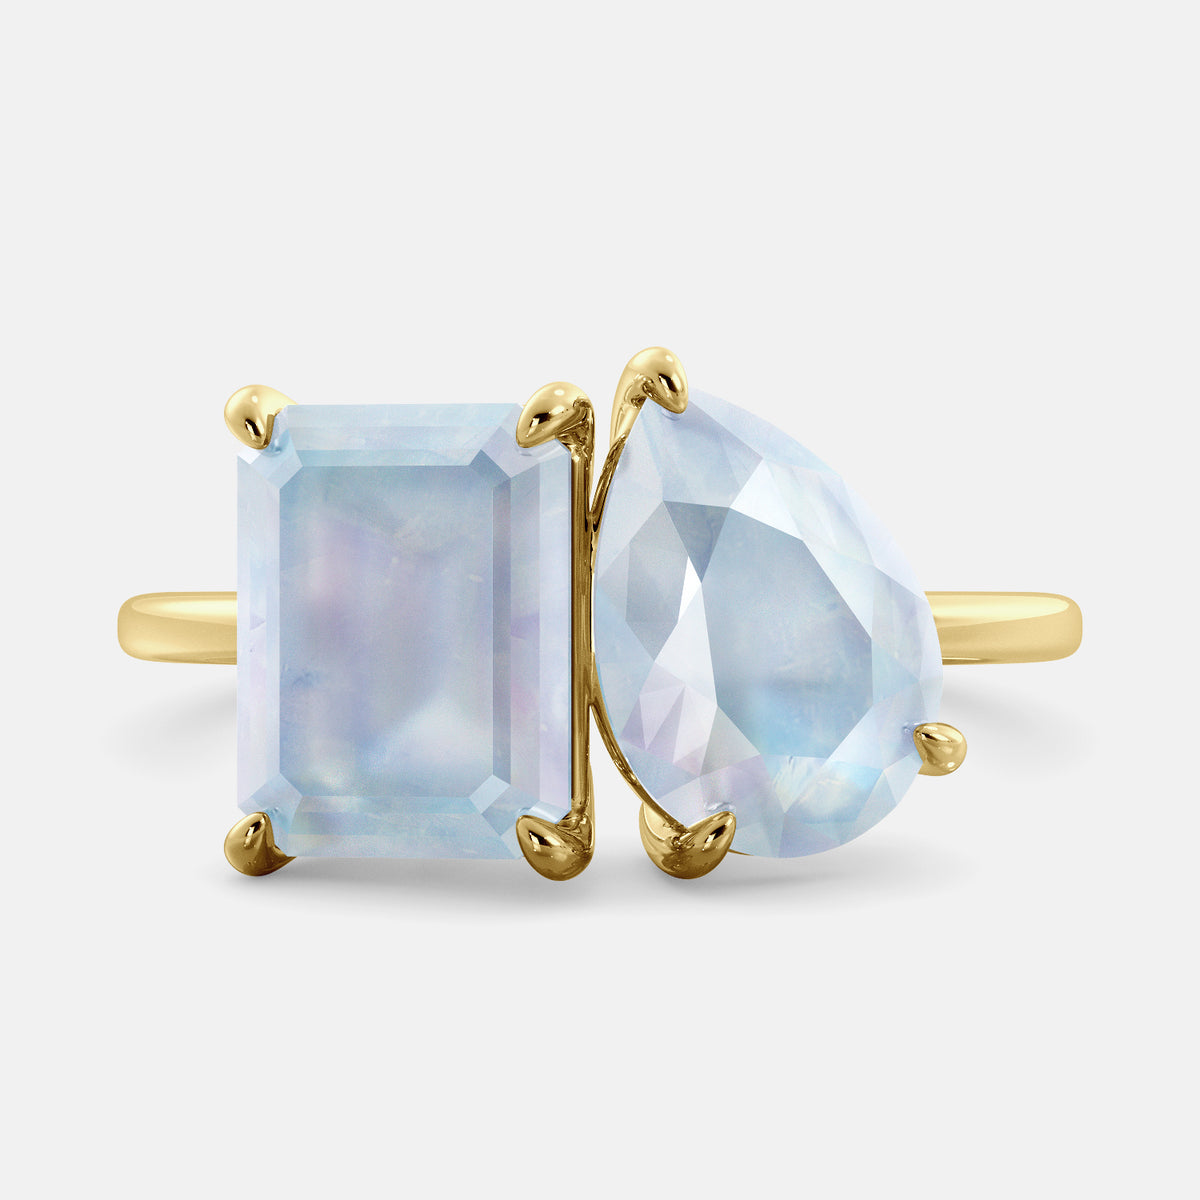 A toi et moi ring with a pear-shaped moonstone and an emerald-cut moonstone. The ring is set in a 14k yellow gold band and is available in all sizes. Moonstone is a gemstone that is said to promote intuition, imagination, and creativity. The toi et moi ring is a beautiful and unique way to show your love and commitment to someone special.